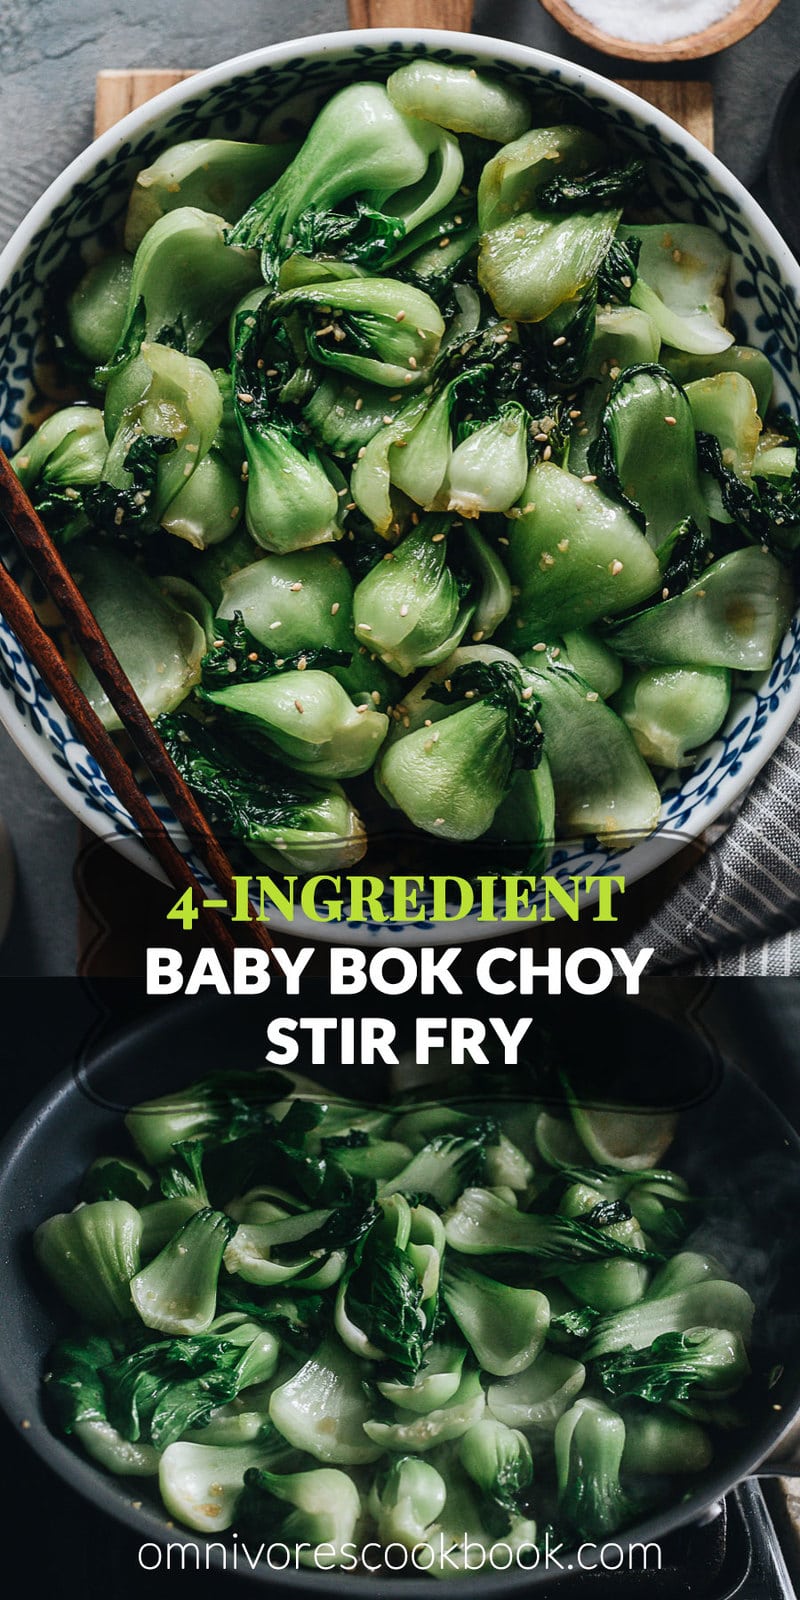 4-Ingredient Baby Bok Choy Stir Fry | Pair this quick and easy side dish with your favorite main and some steamed rice to complete a nutritious meal. This dish takes 15 minutes to whip together. The baby bok choy is cooked until tender, then soaked with a garlicky sauce that’s savory and lightly sweet. It’s such a great way to enjoy vegetables. {Vegan, Gluten-Free Adaptable}